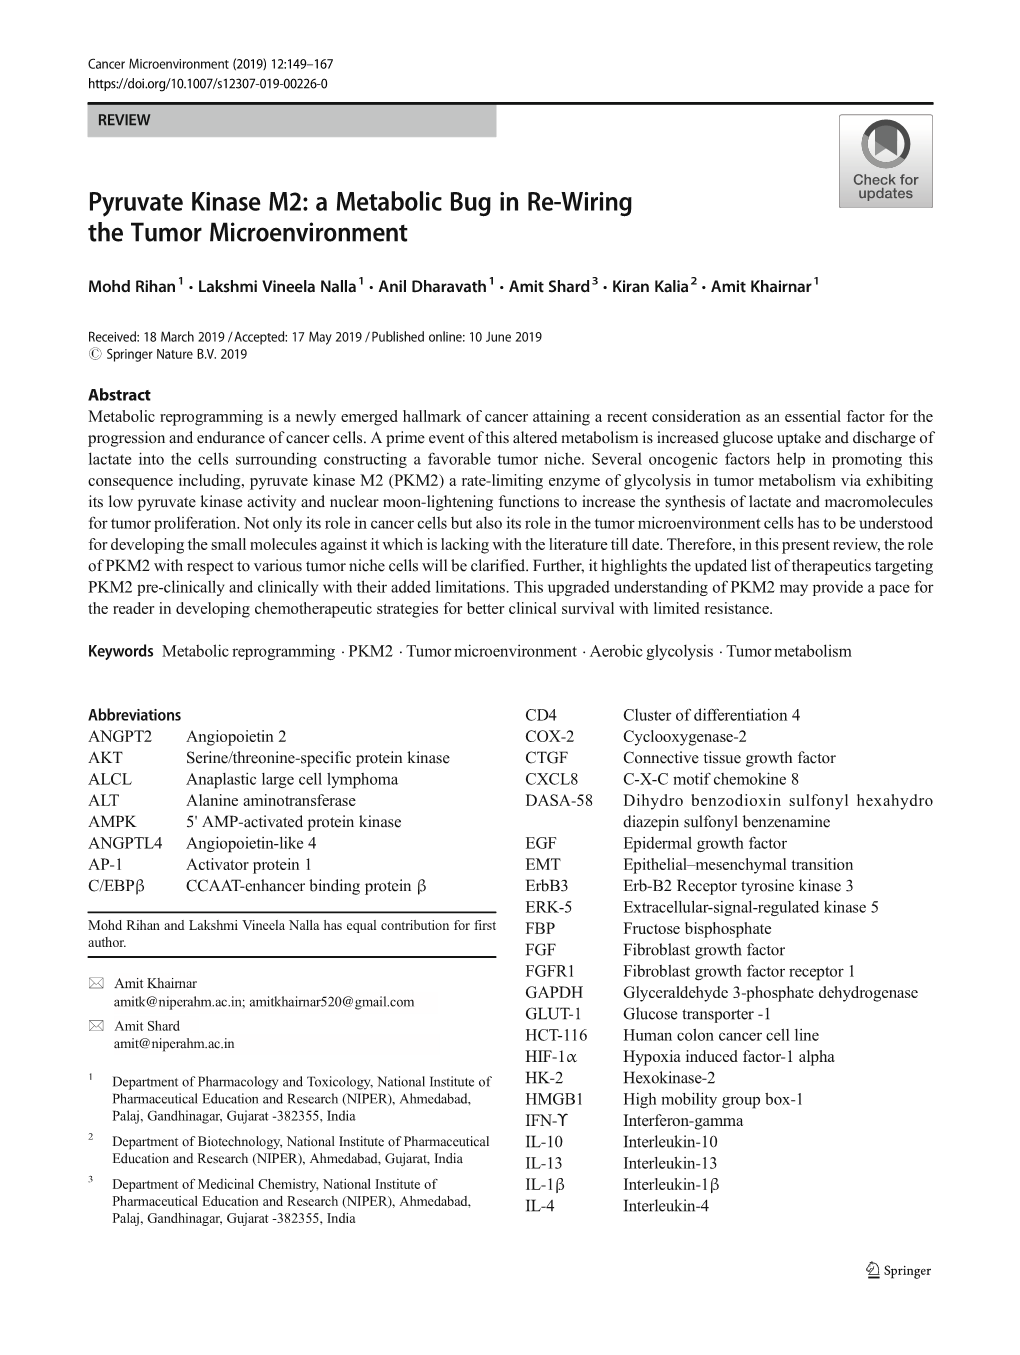 Pyruvate Kinase M2: a Metabolic Bug in Re-Wiring the Tumor Microenvironment